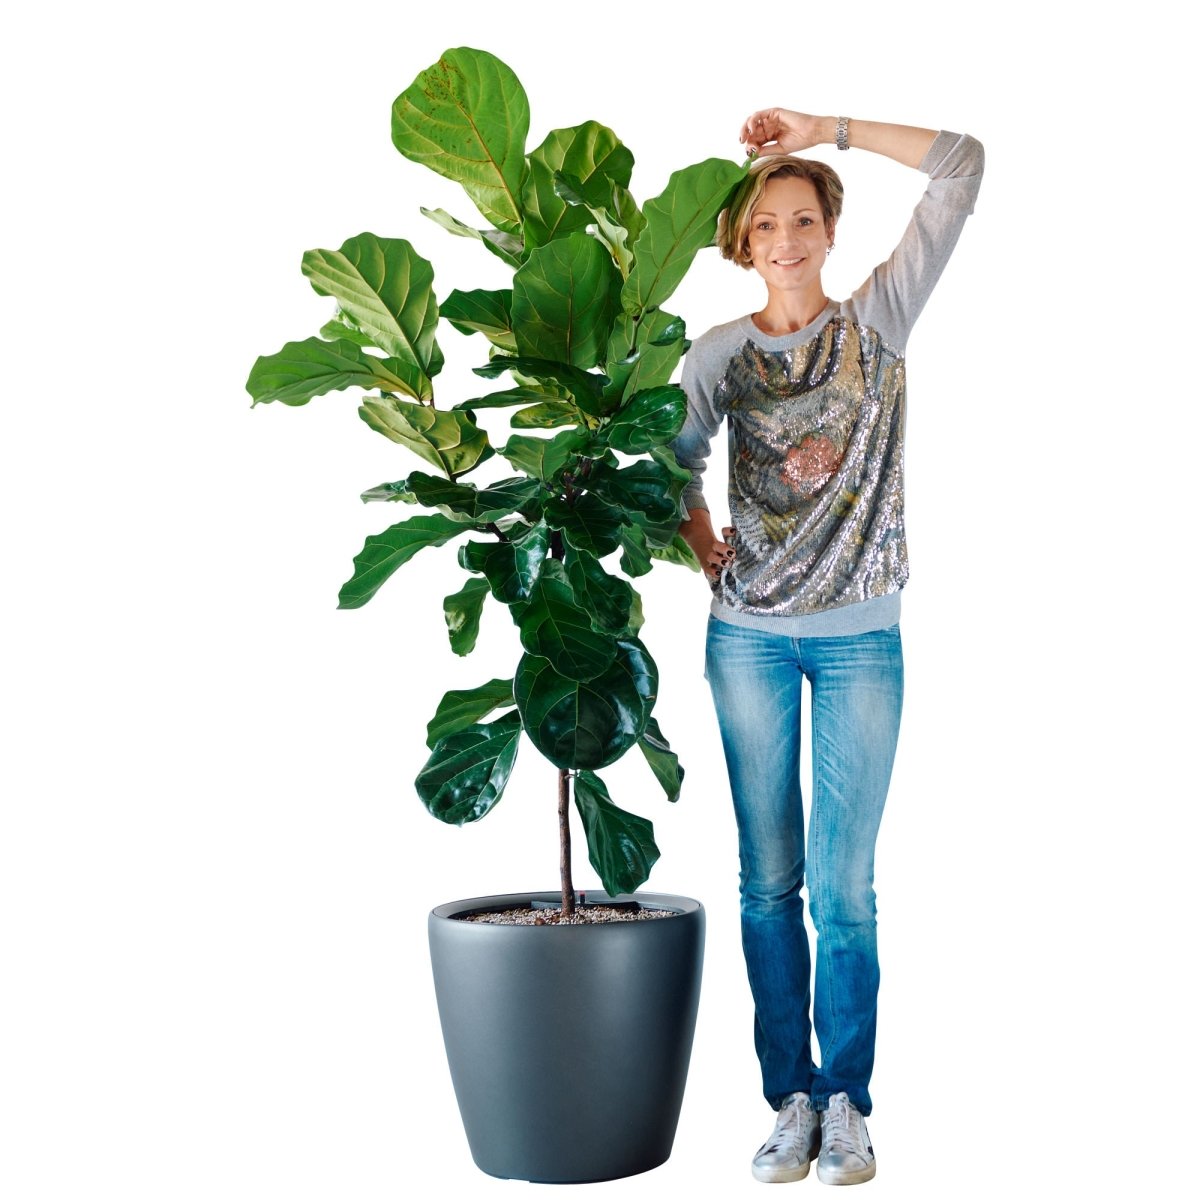 Fiddle Leaf Fig Tree Potted In Lechuza Classico 50 Planter - Charcoal Metallic - My City Plants